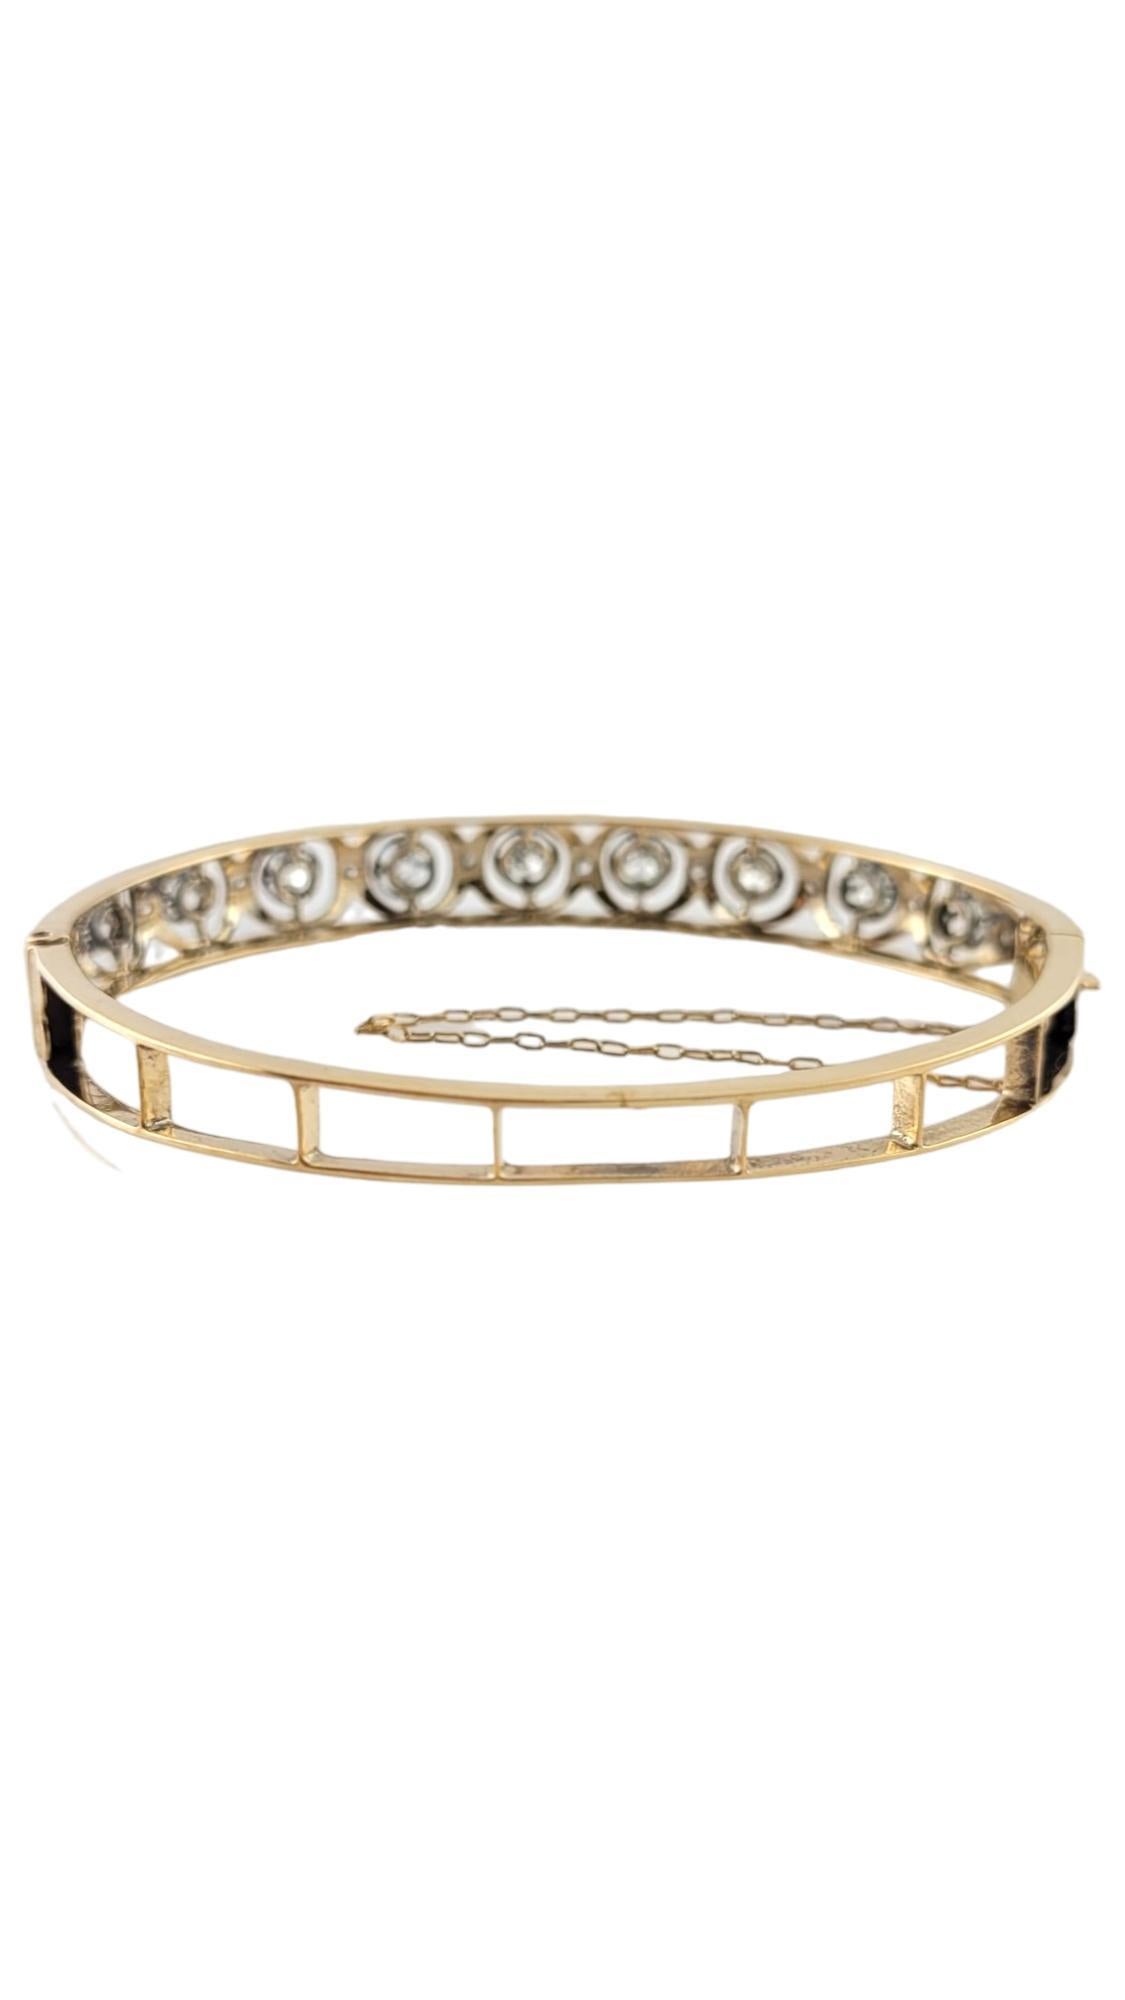 Vintage 14 Karat Yellow/White Gold and Diamond Bangle Bracelet #16980 In Good Condition For Sale In Washington Depot, CT